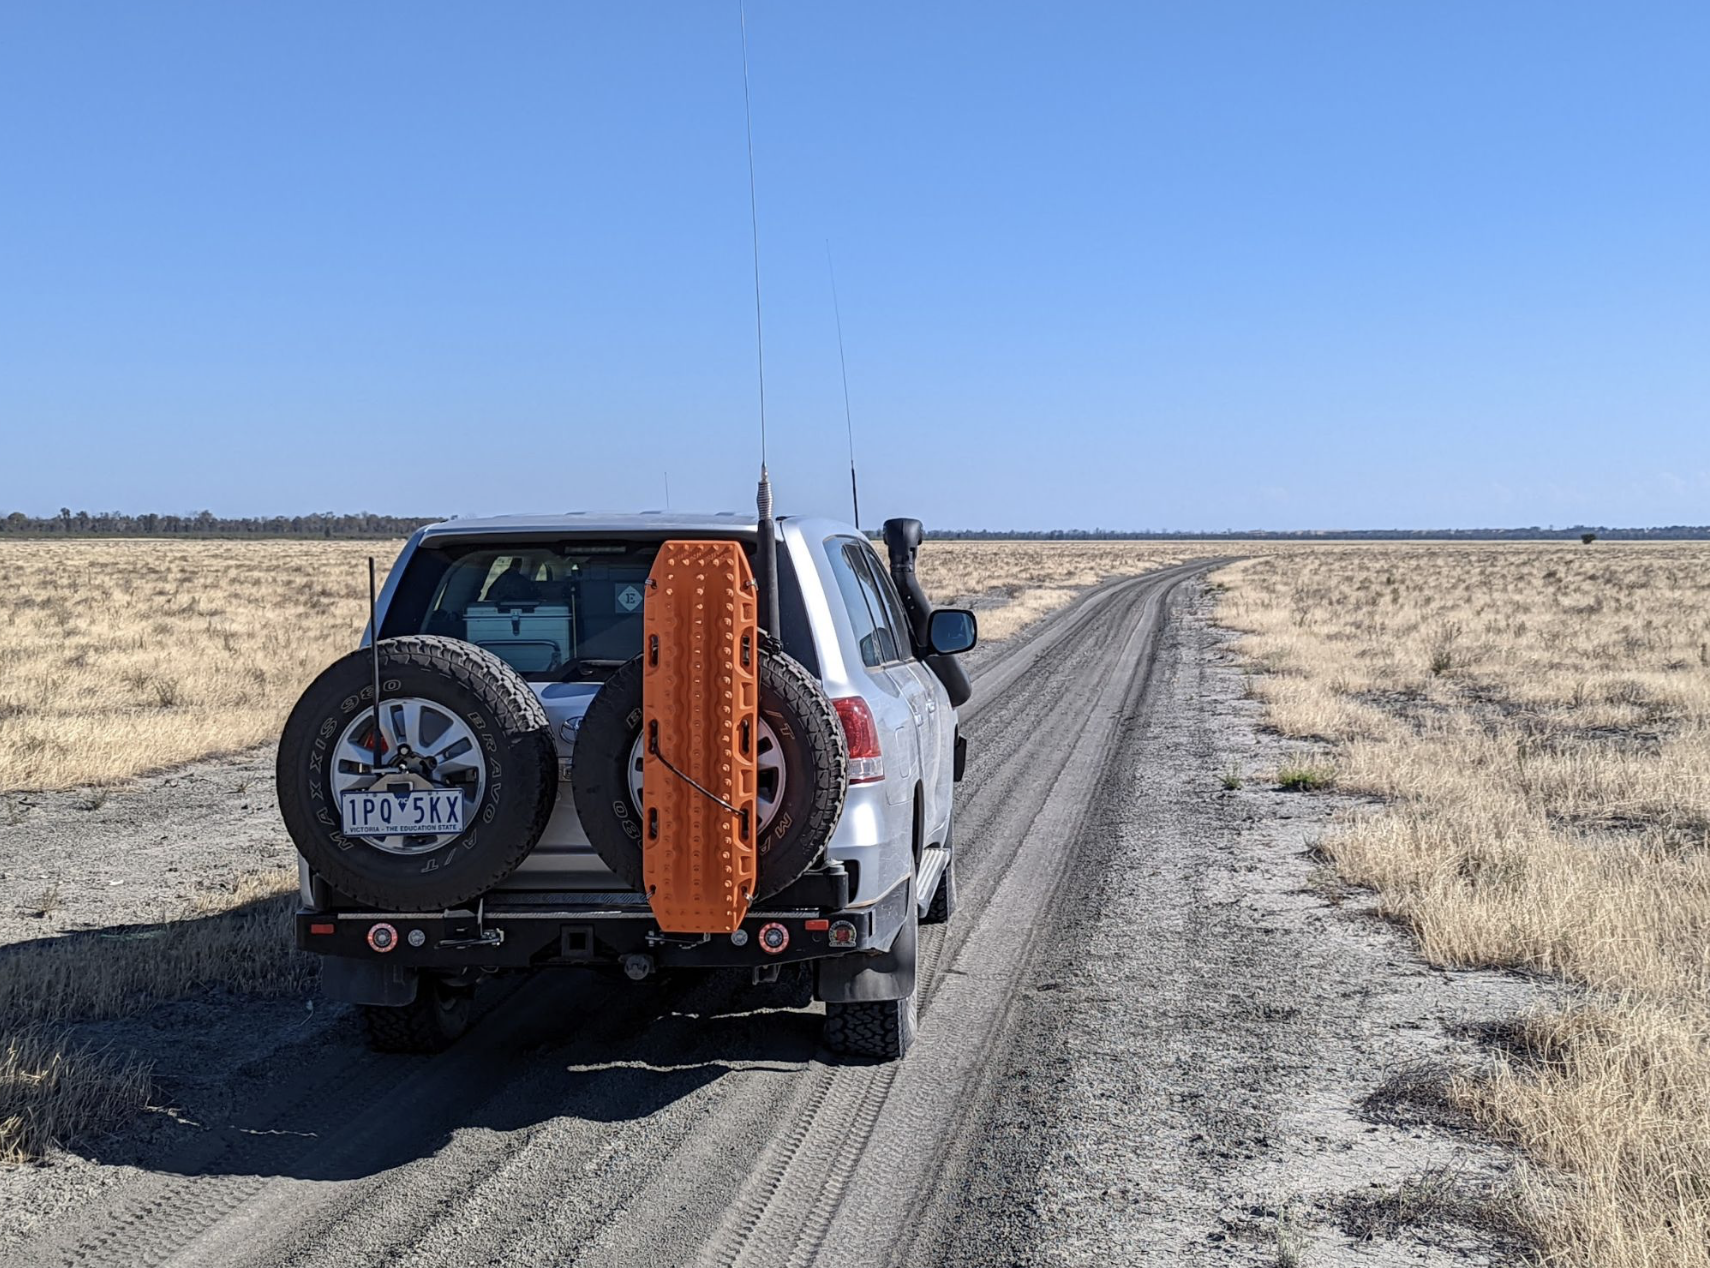 Our 4x4 with large HF antennas mounted driving through a dry lake